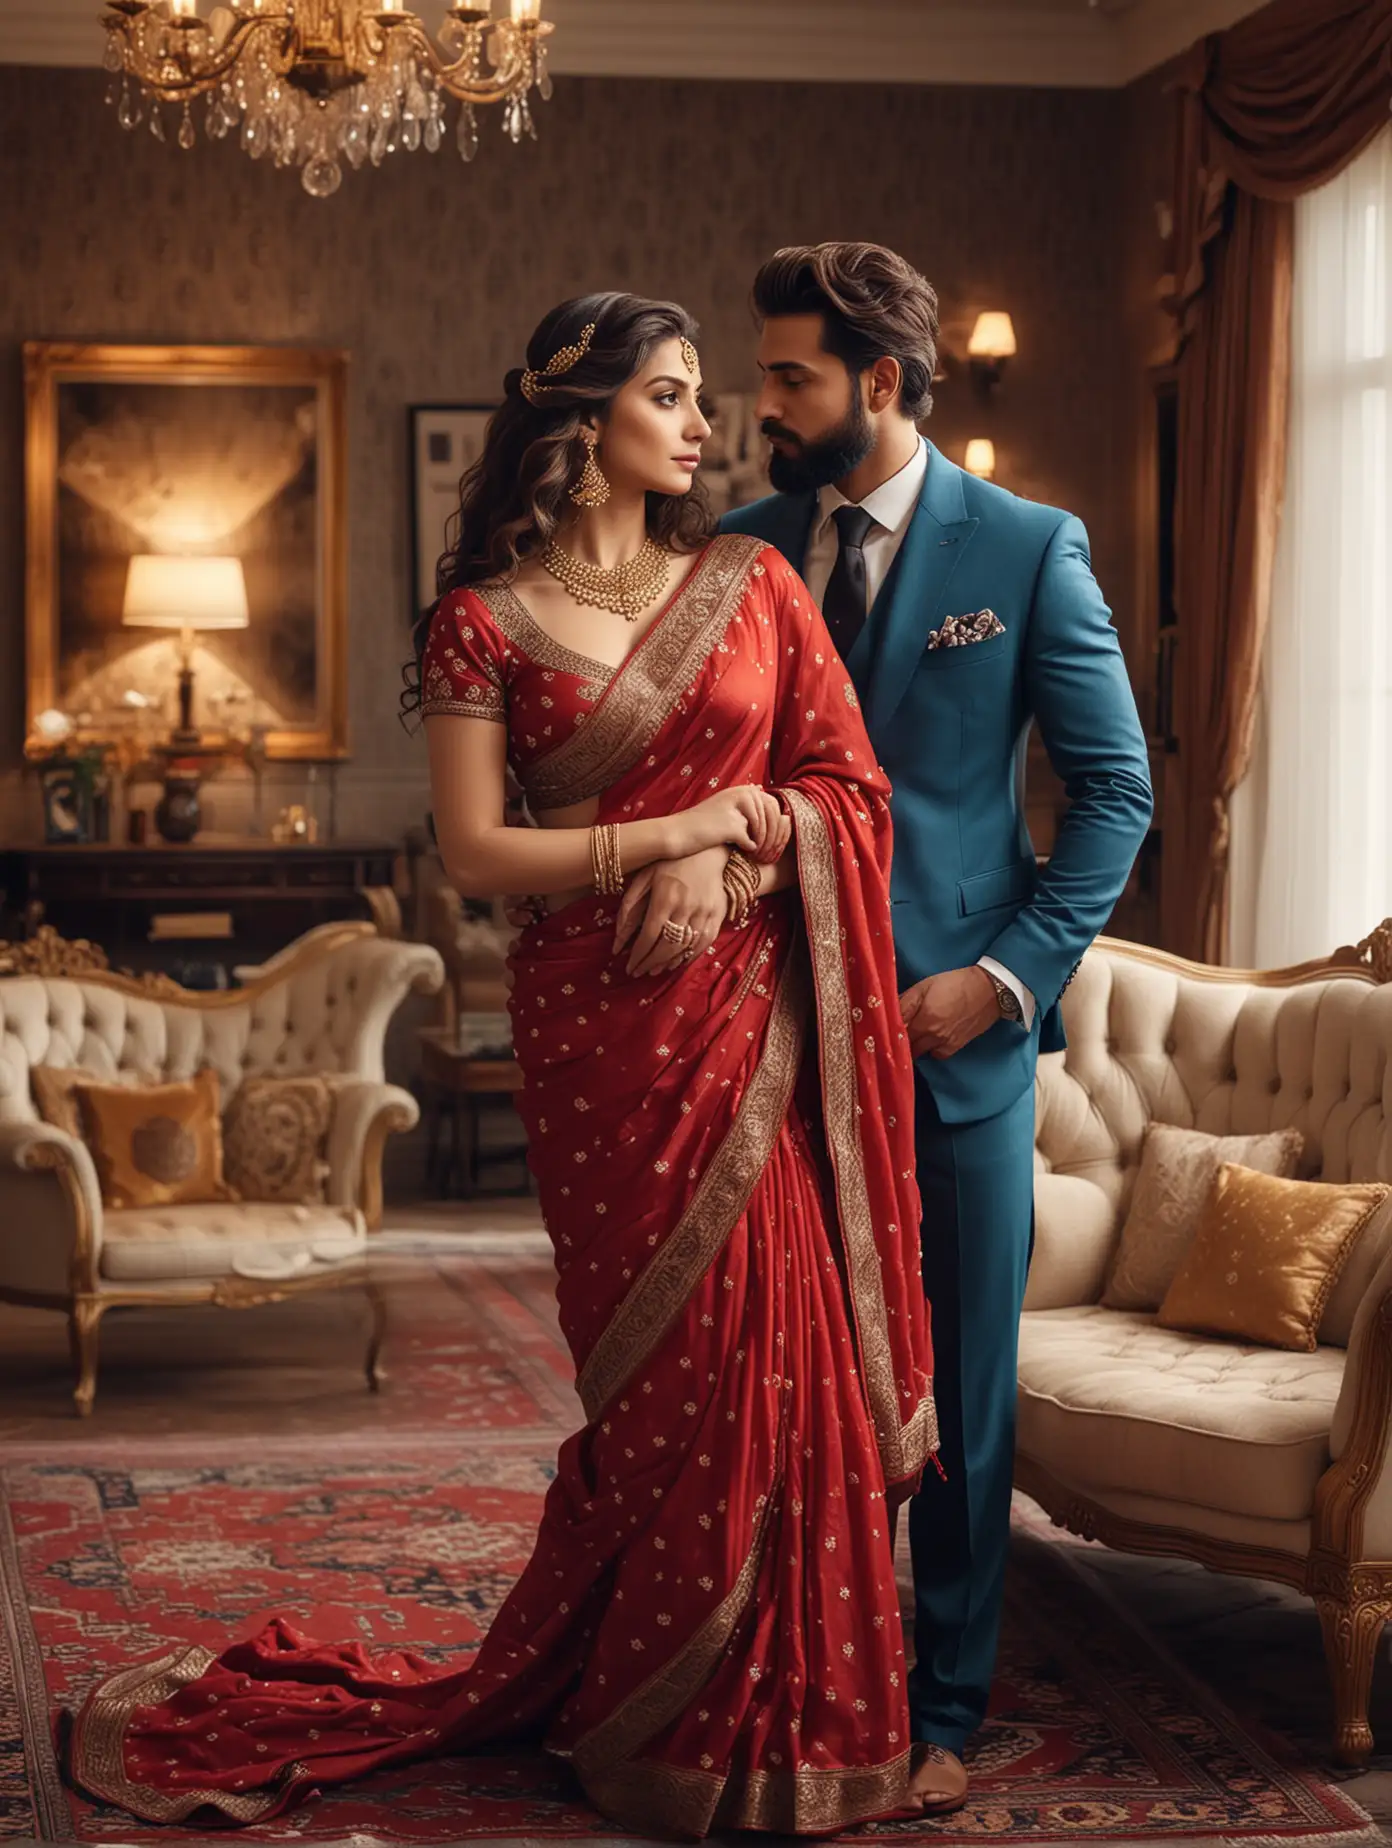 Romantic-Reunion-of-Elegant-European-and-Indian-Couple-in-Luxurious-Modern-Room